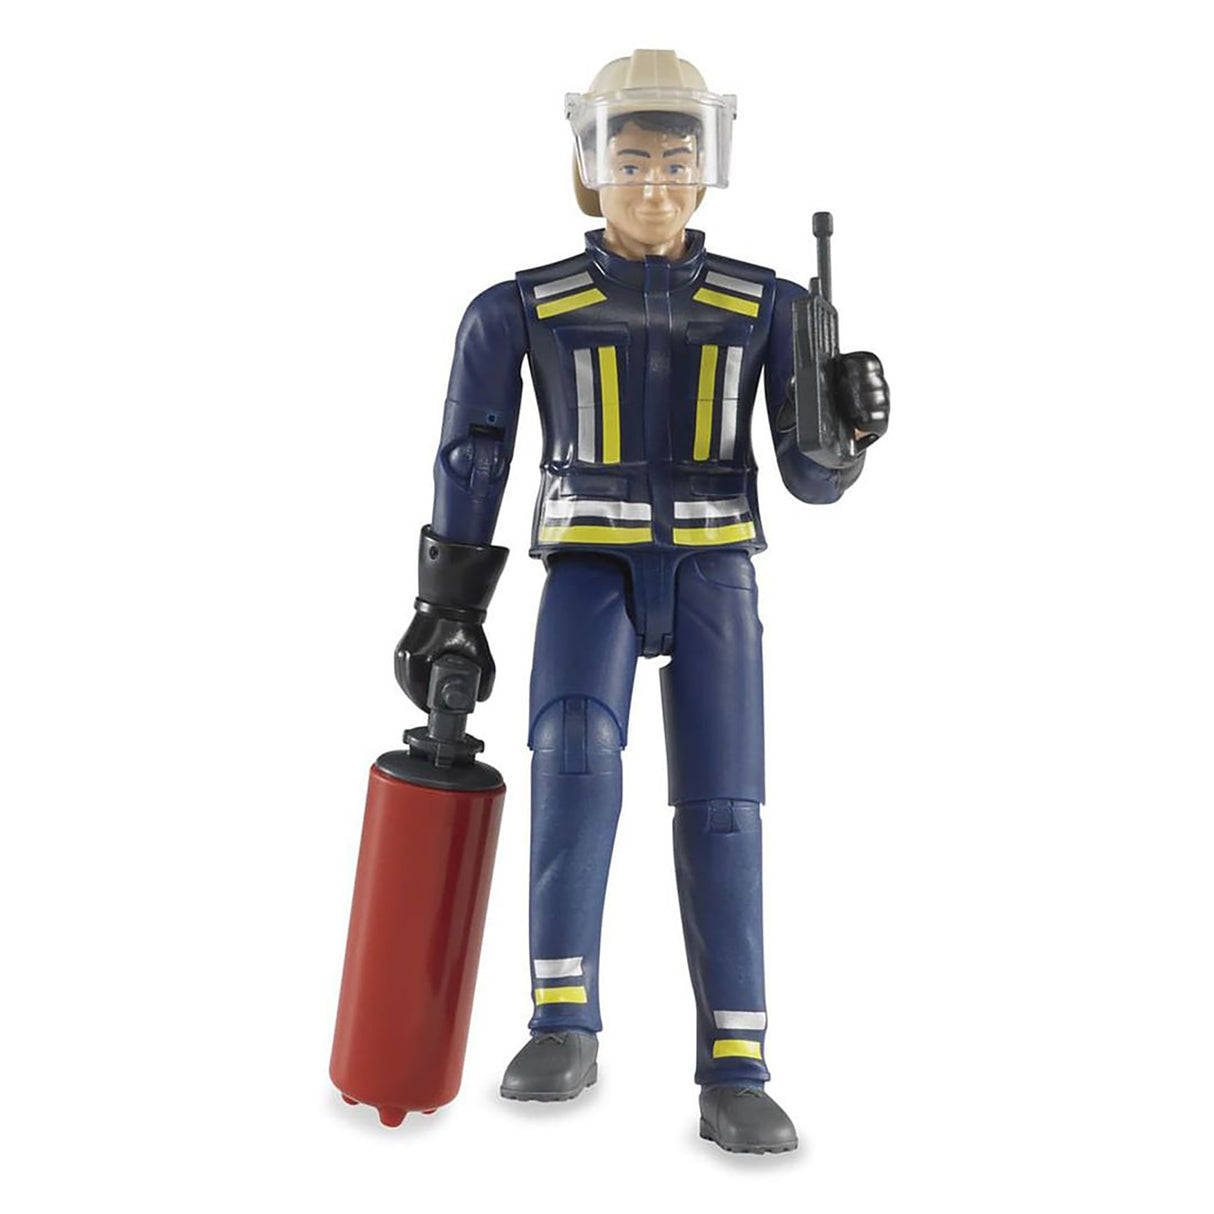 Bruder BWorld Fireman with Helmet, Gloves and Accessories